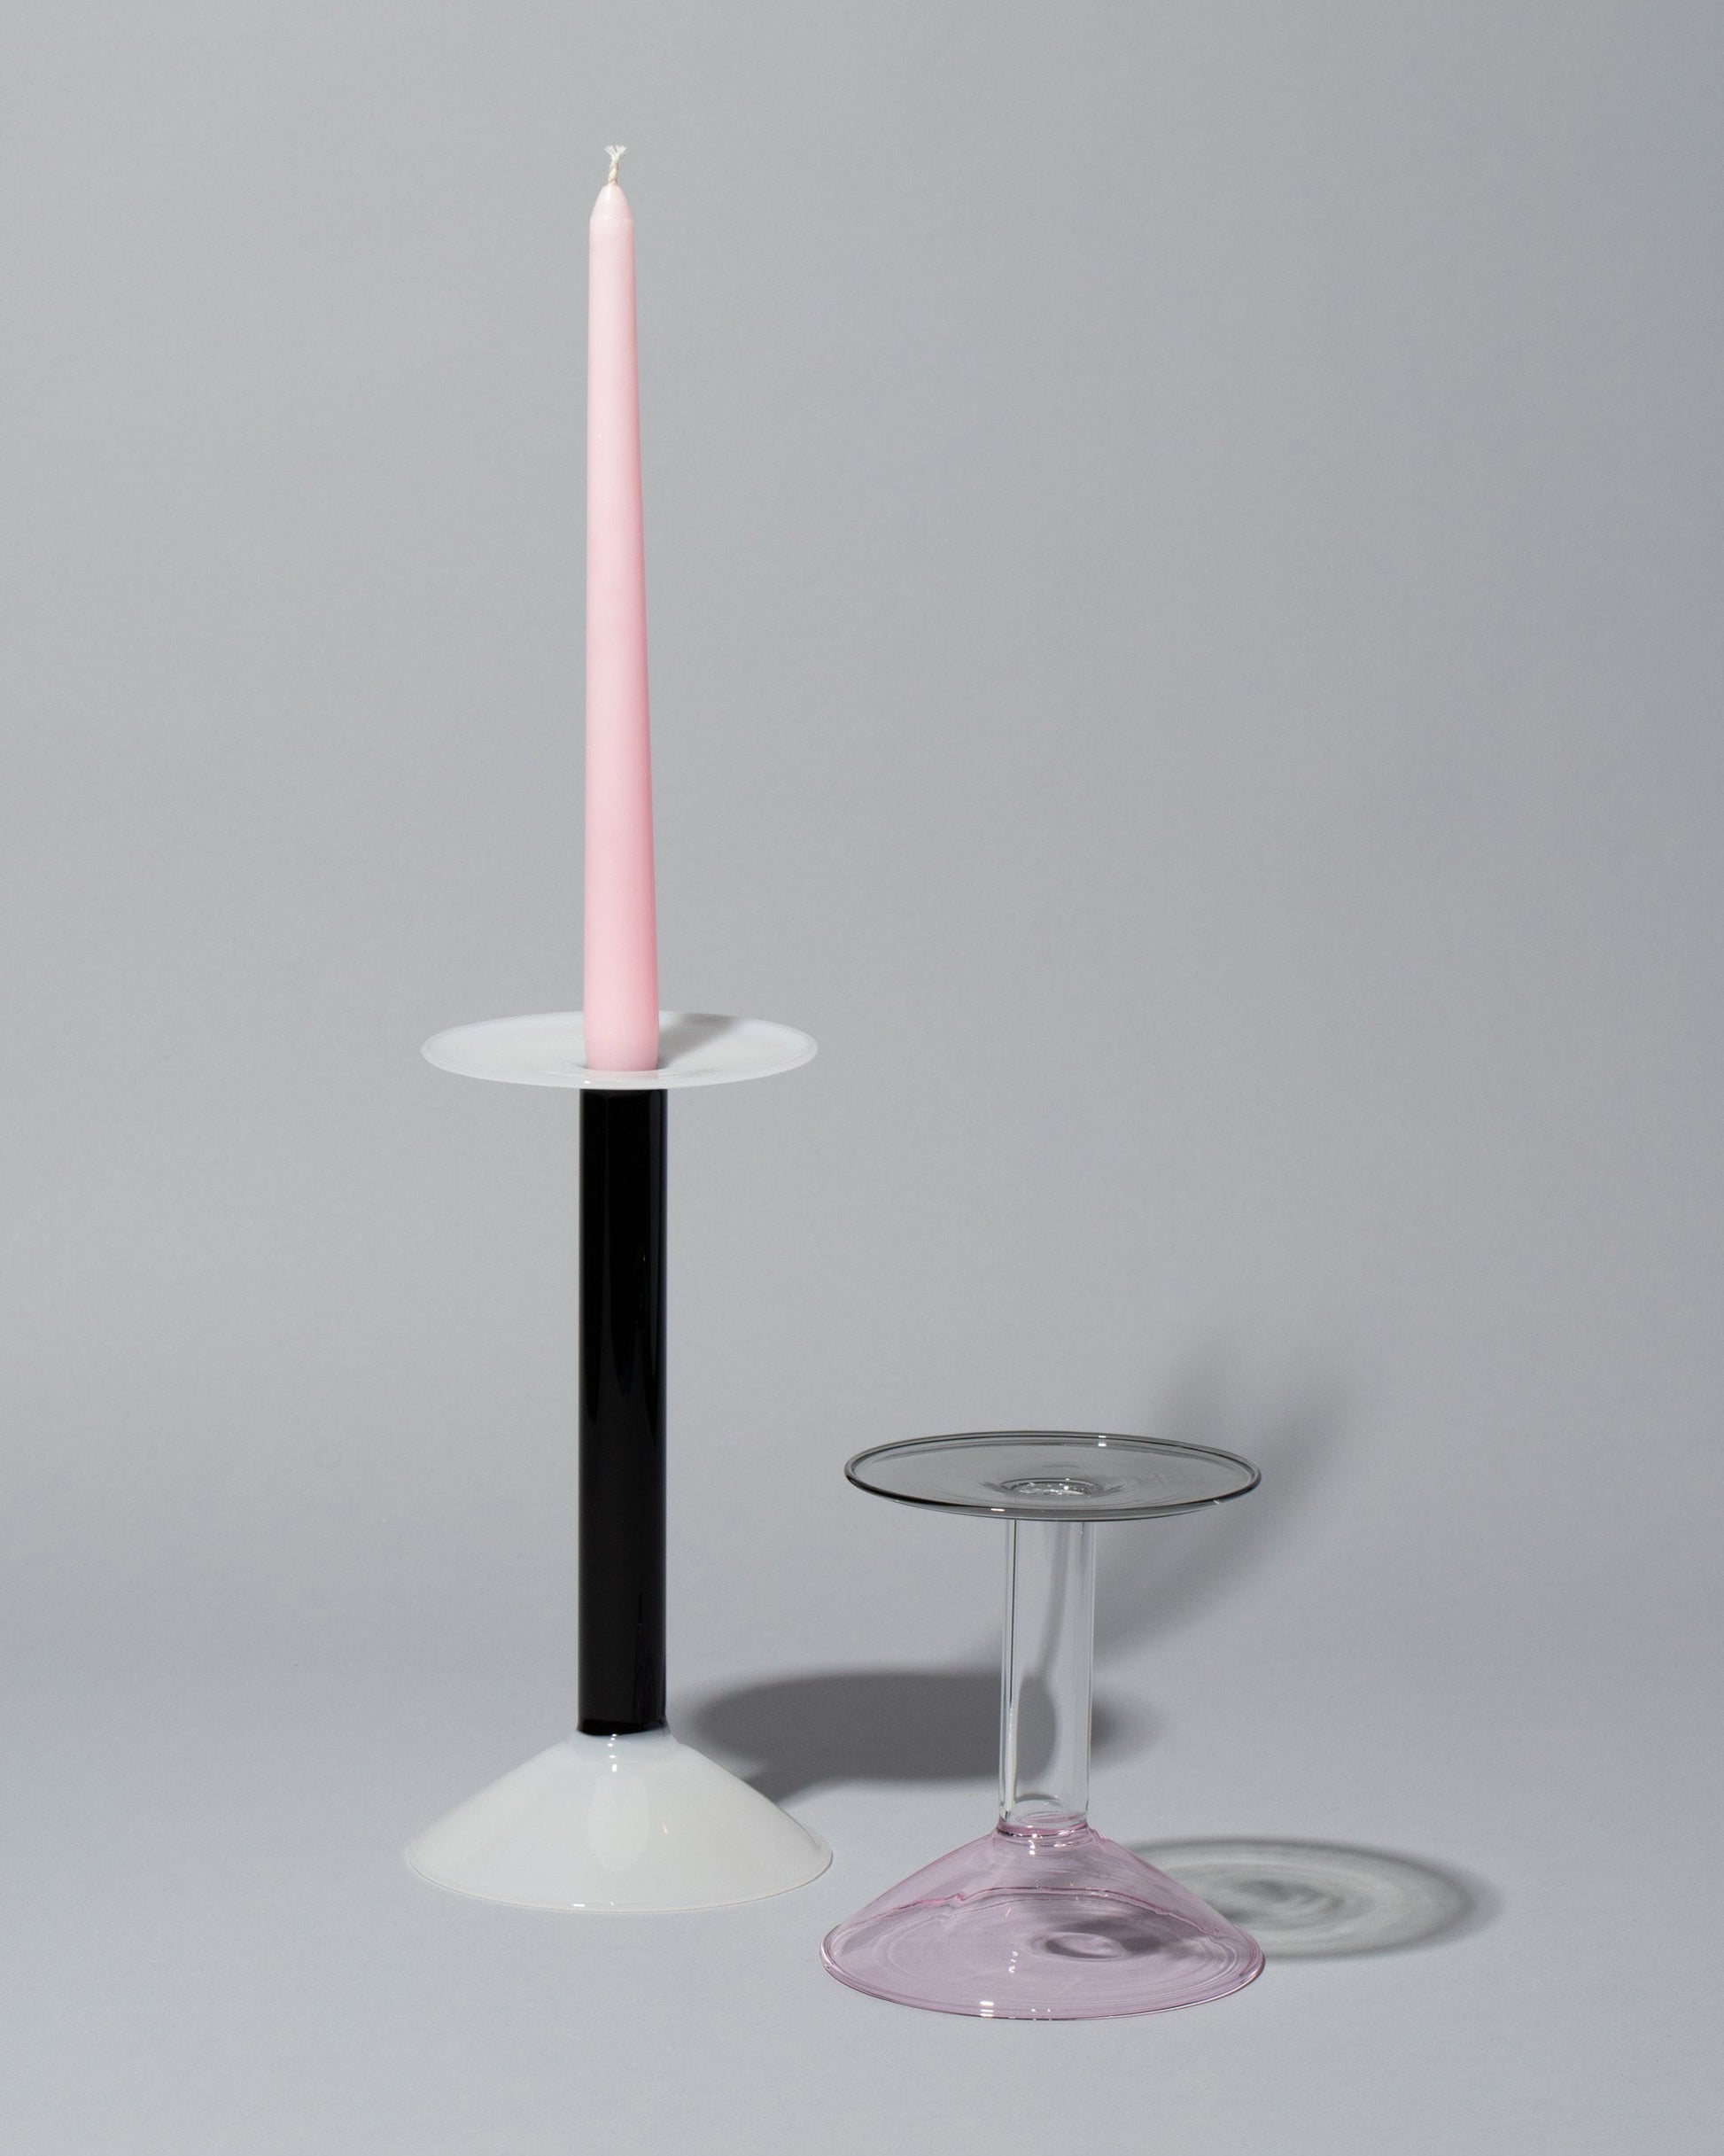 Group of Ichendorf Milano Medium White/Black and Small Pink/Clear/Grey Rainbow Candleholders on light color background.